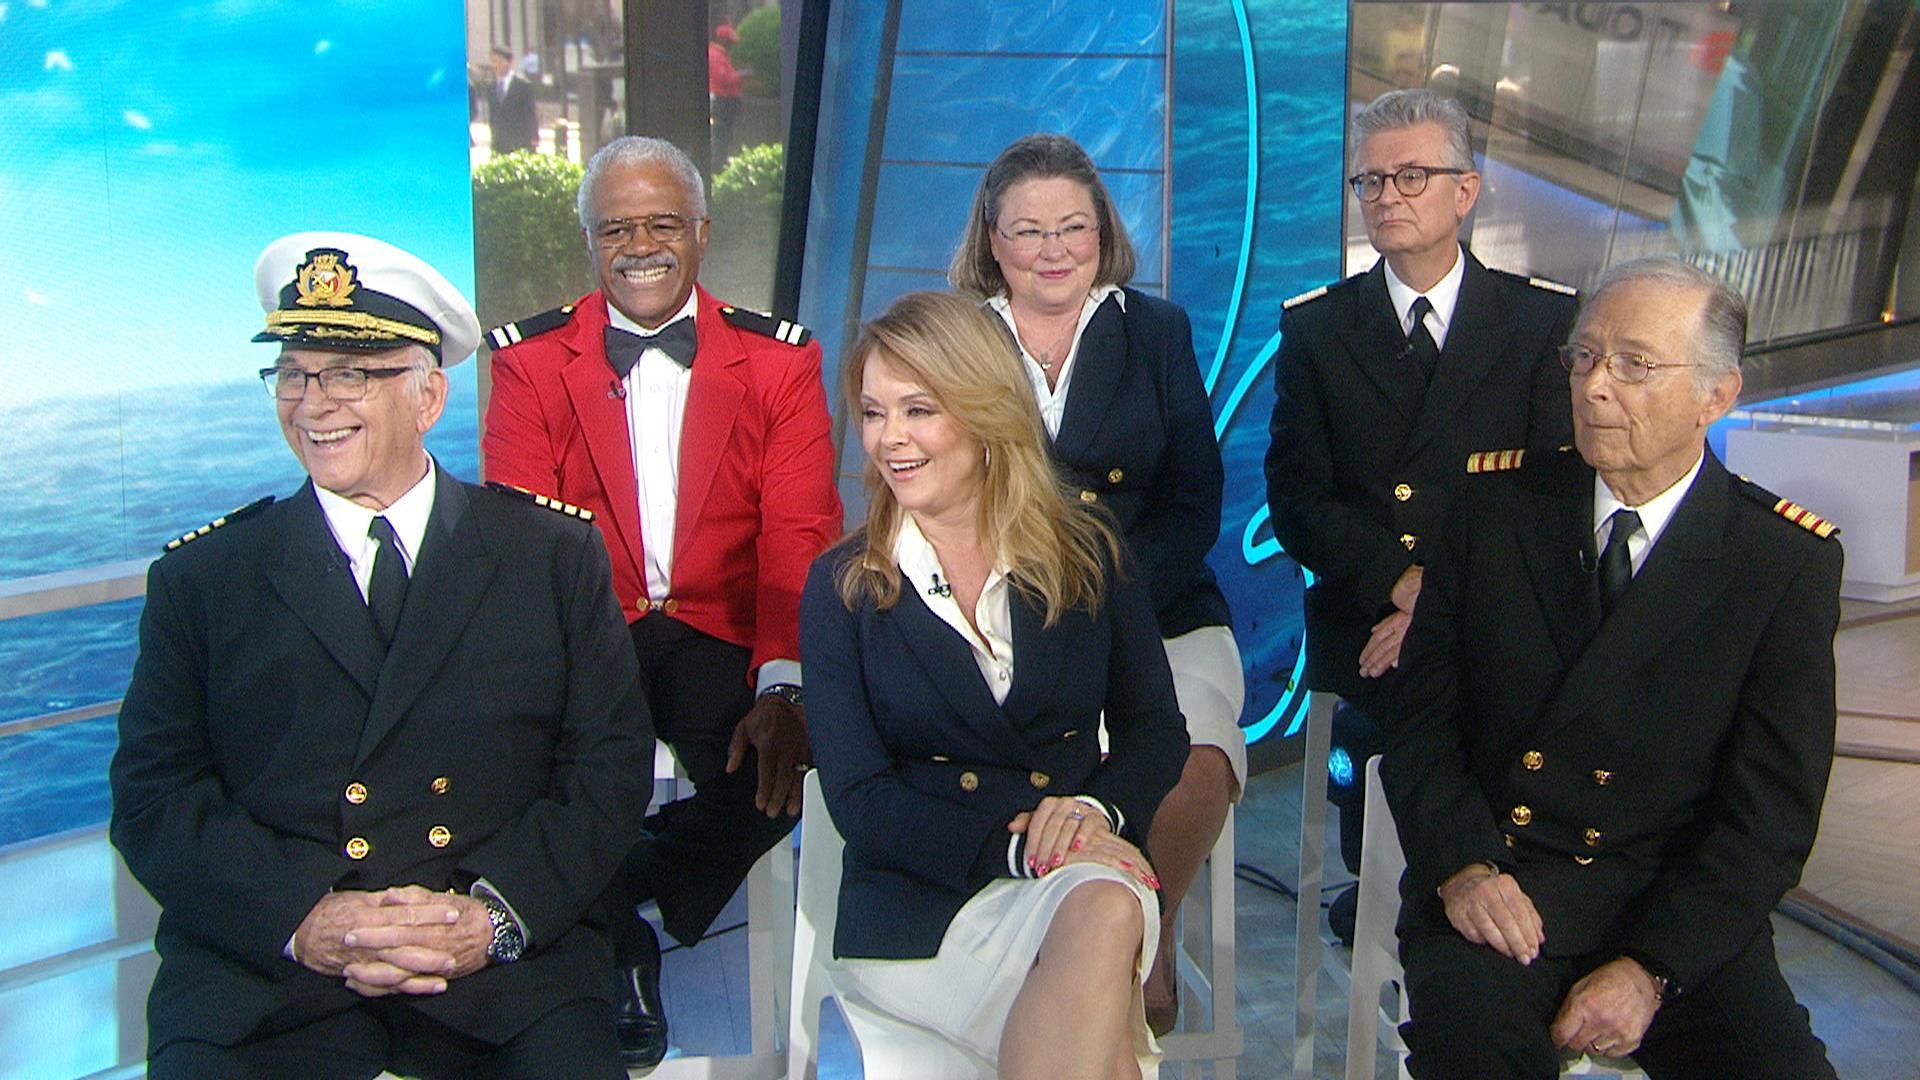 See The Love Boat Cast Reunite Live On Today And Get A Big